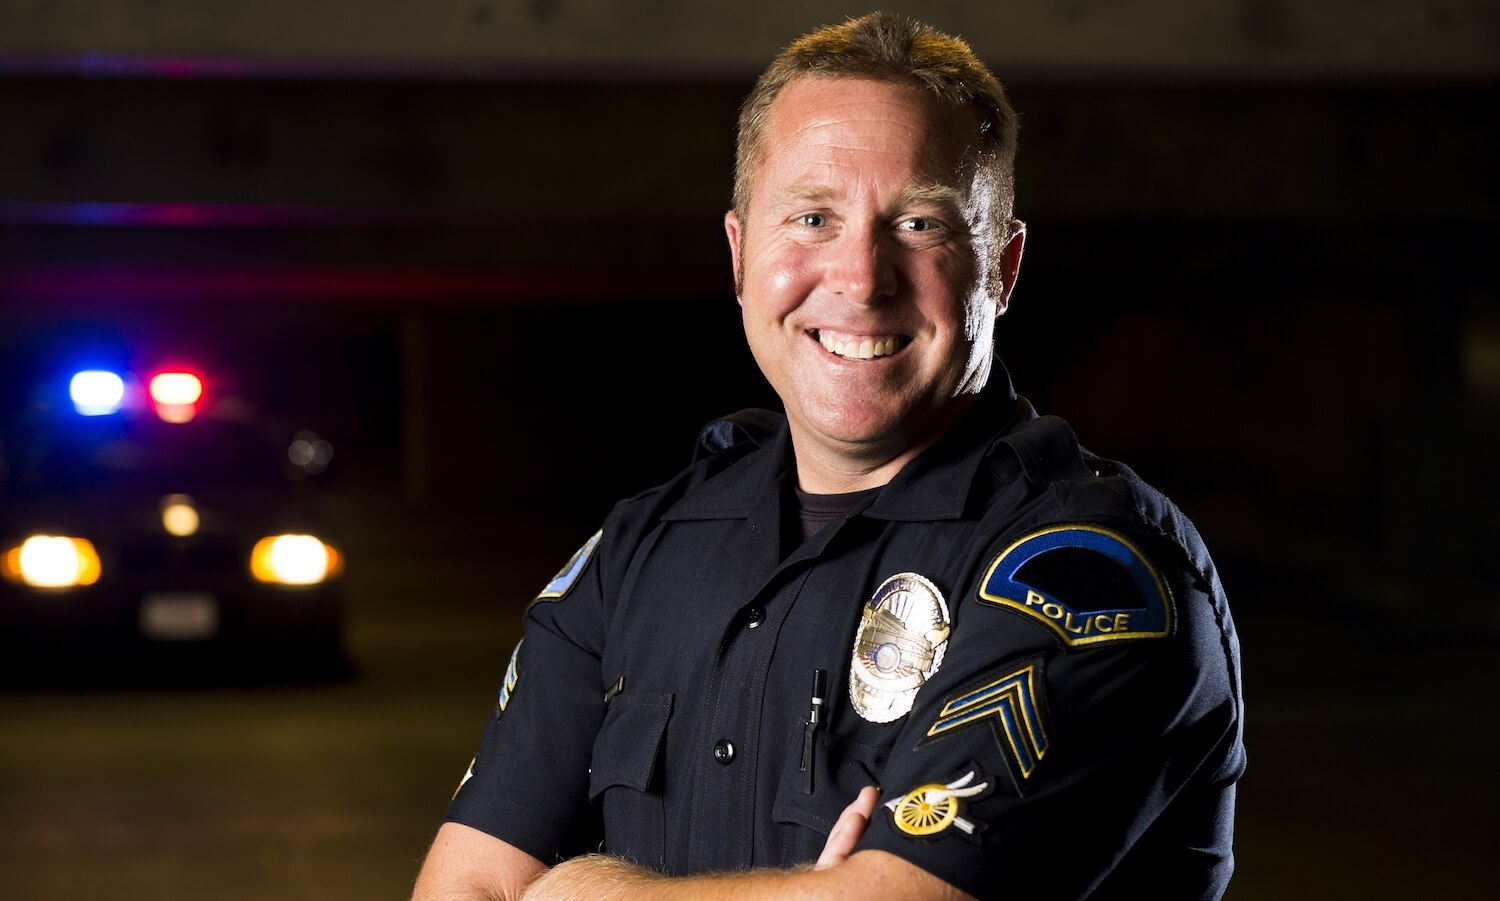 A smiling police officer with his patrol car in the background.